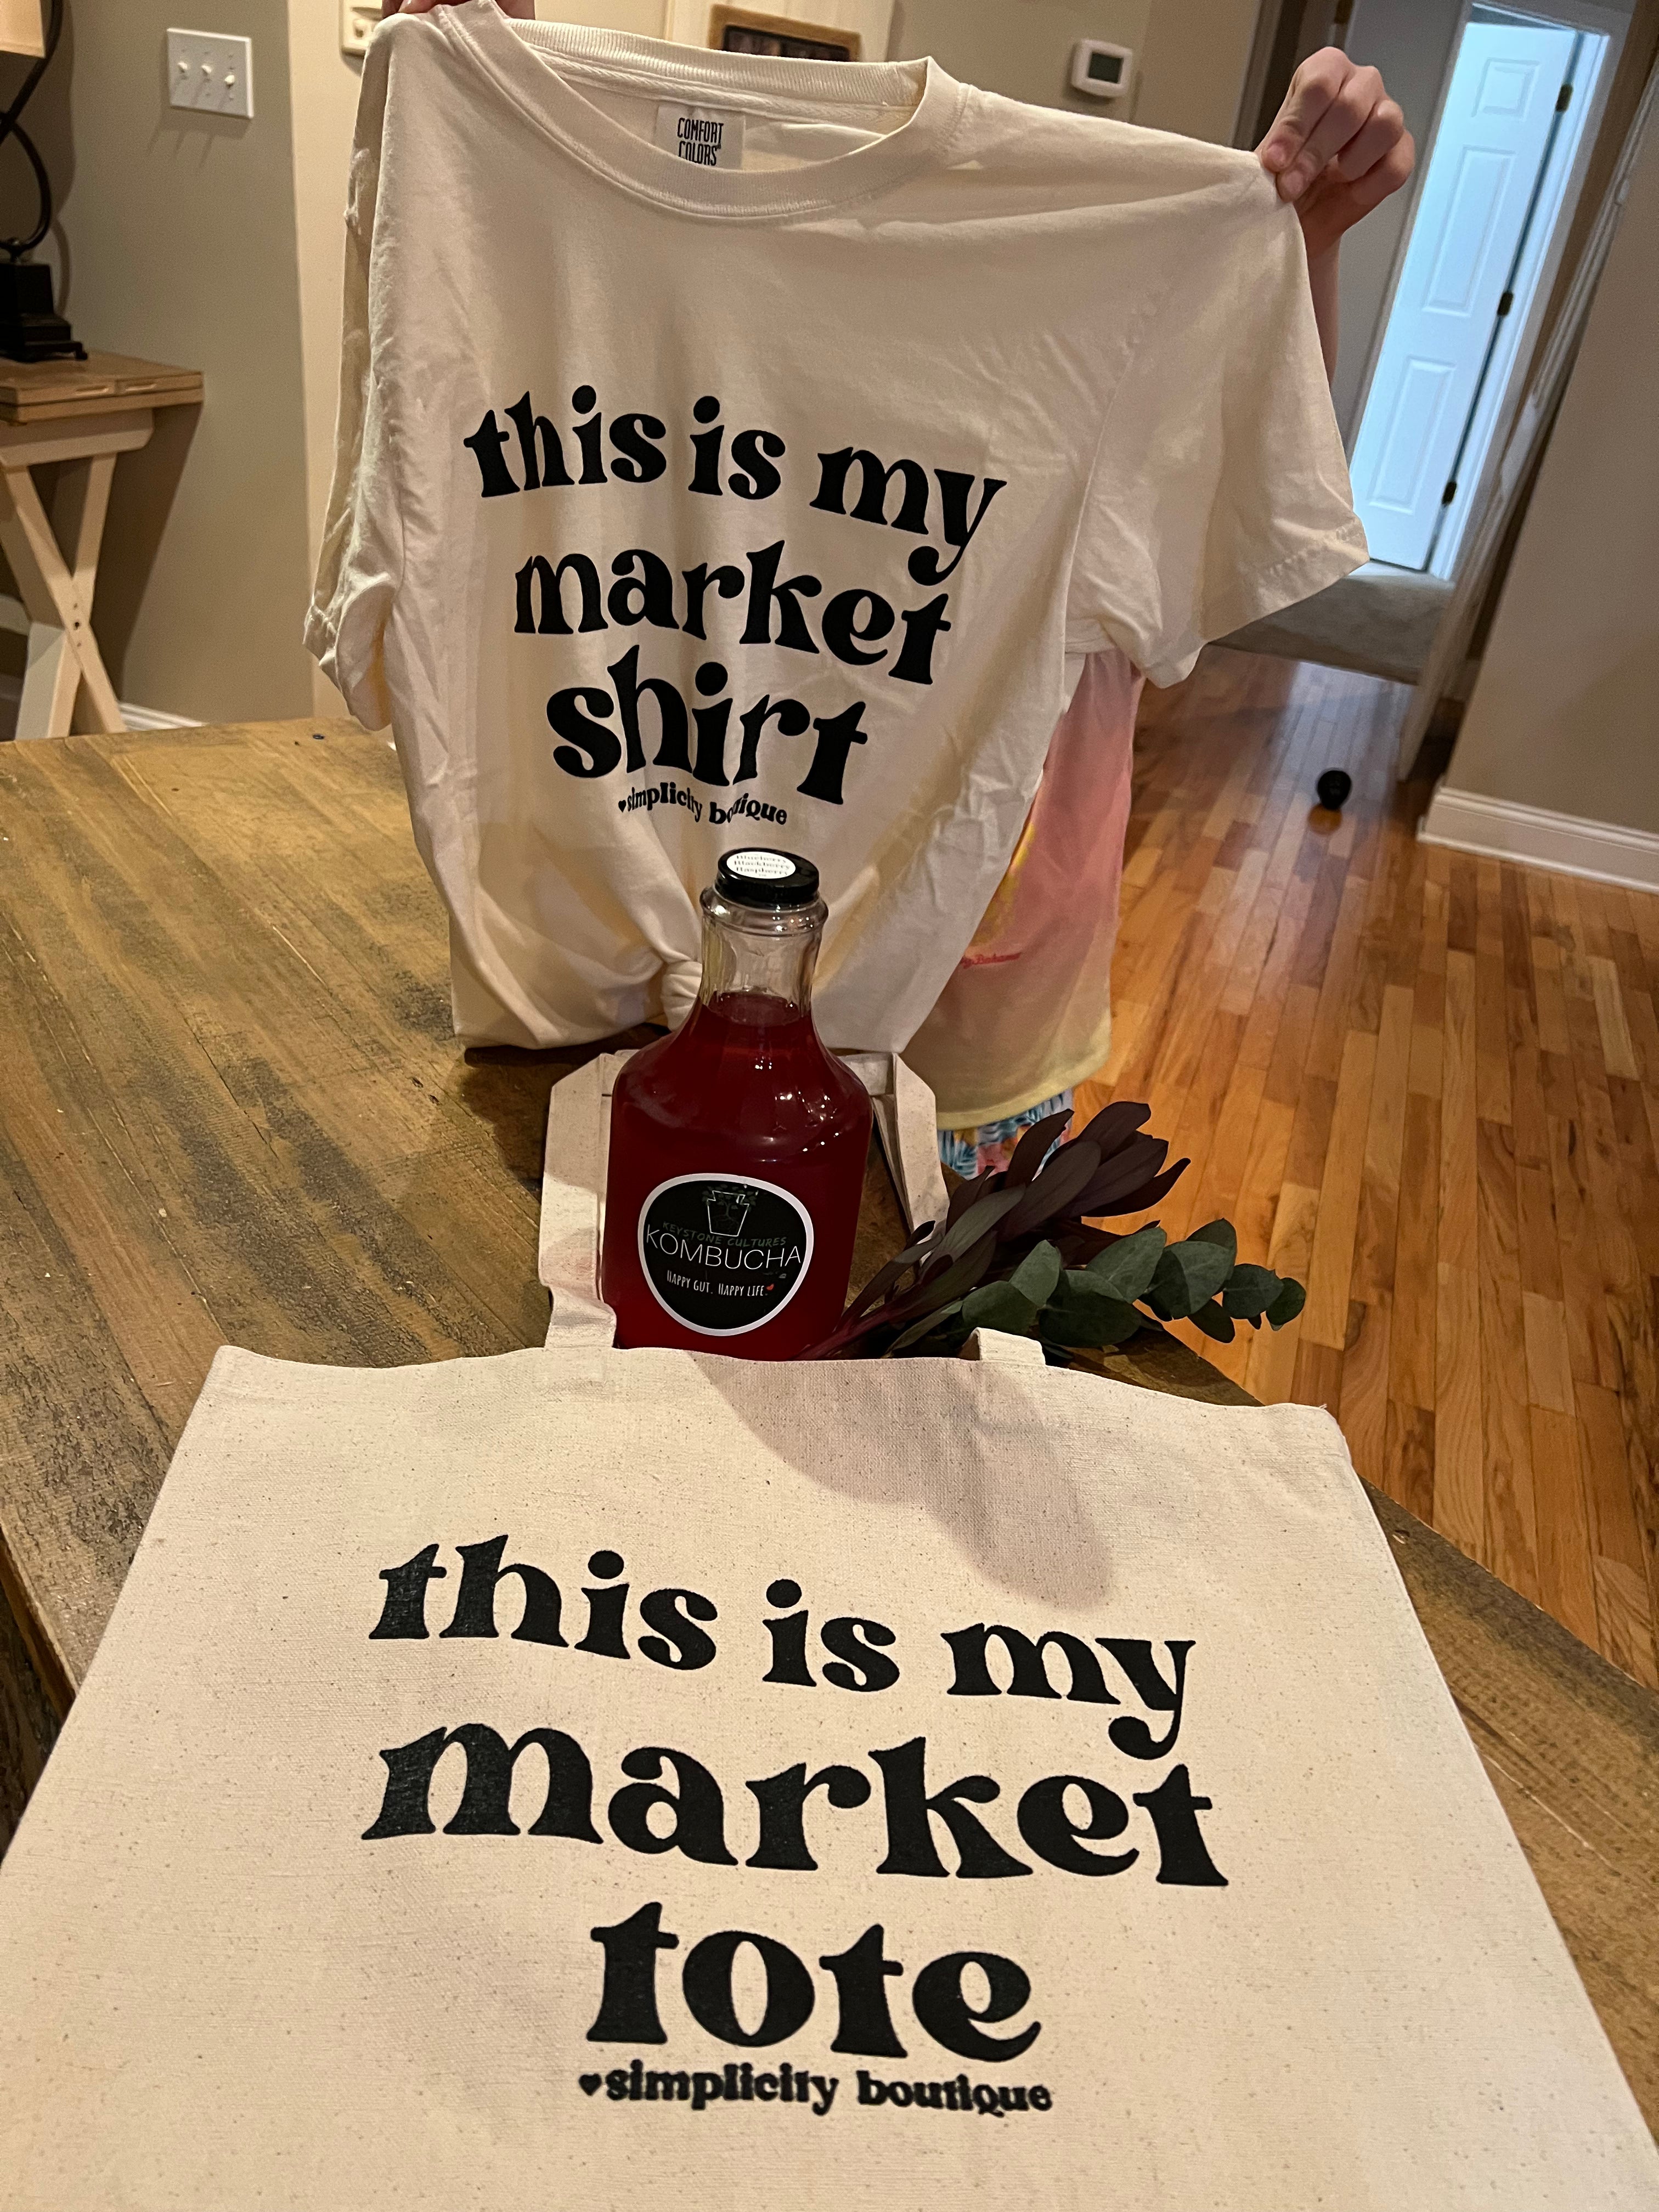 This is my market shirt